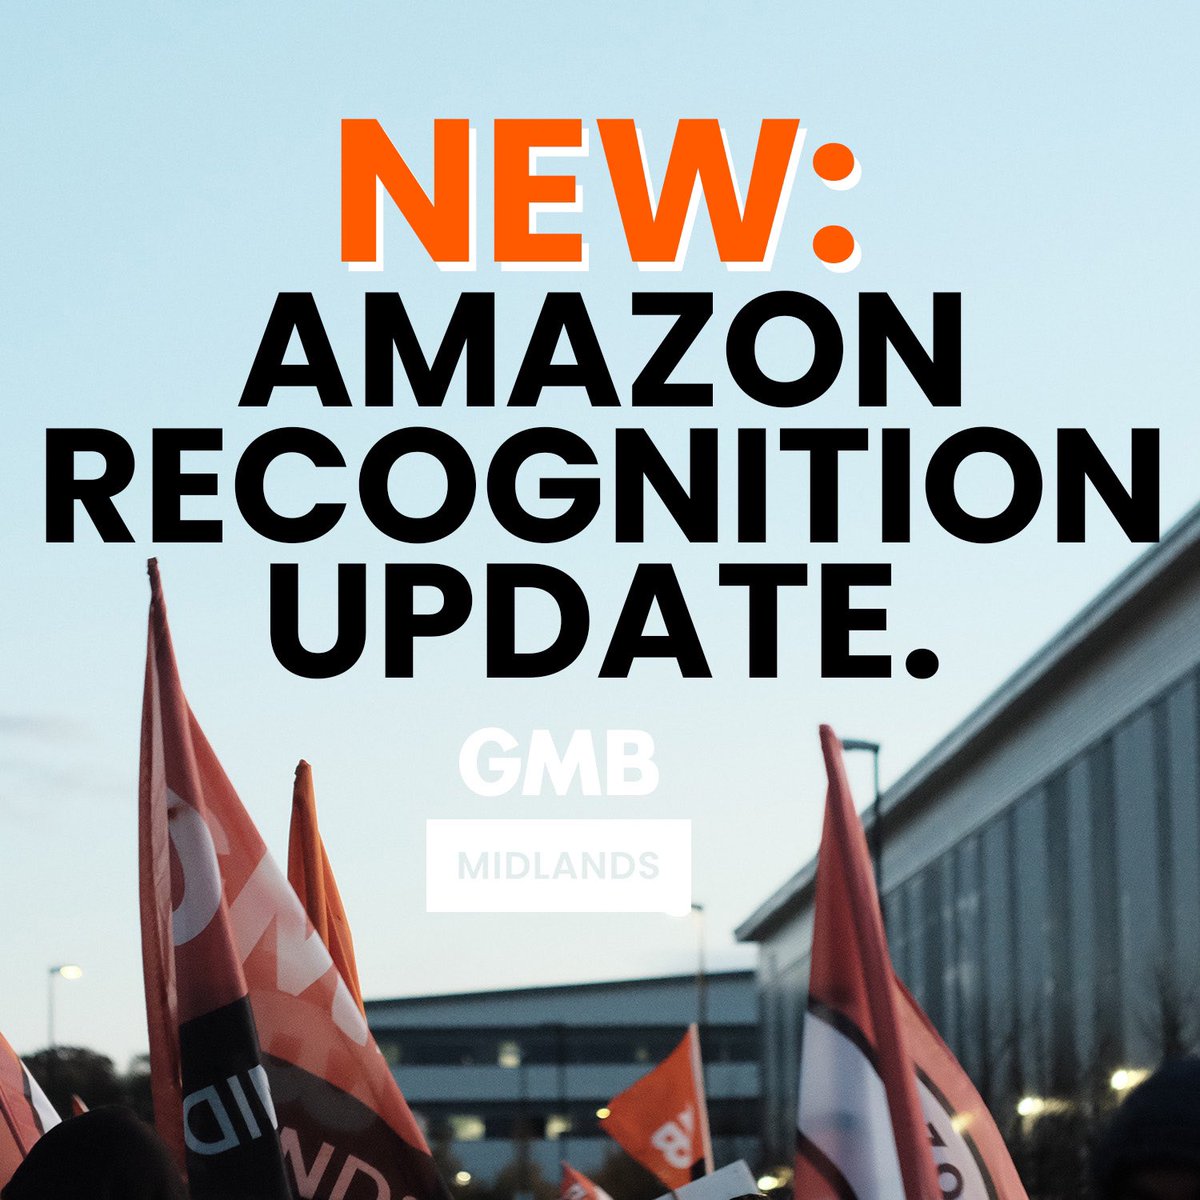 It’s been legal gymnastics from Amazon in their attempt to smash drives for union recognition. But after a year of industrial action, today GMB members at Amazon Coventry submitted their bid for union recognition. More from GMB: gmb.org.uk/news/amazon-on…